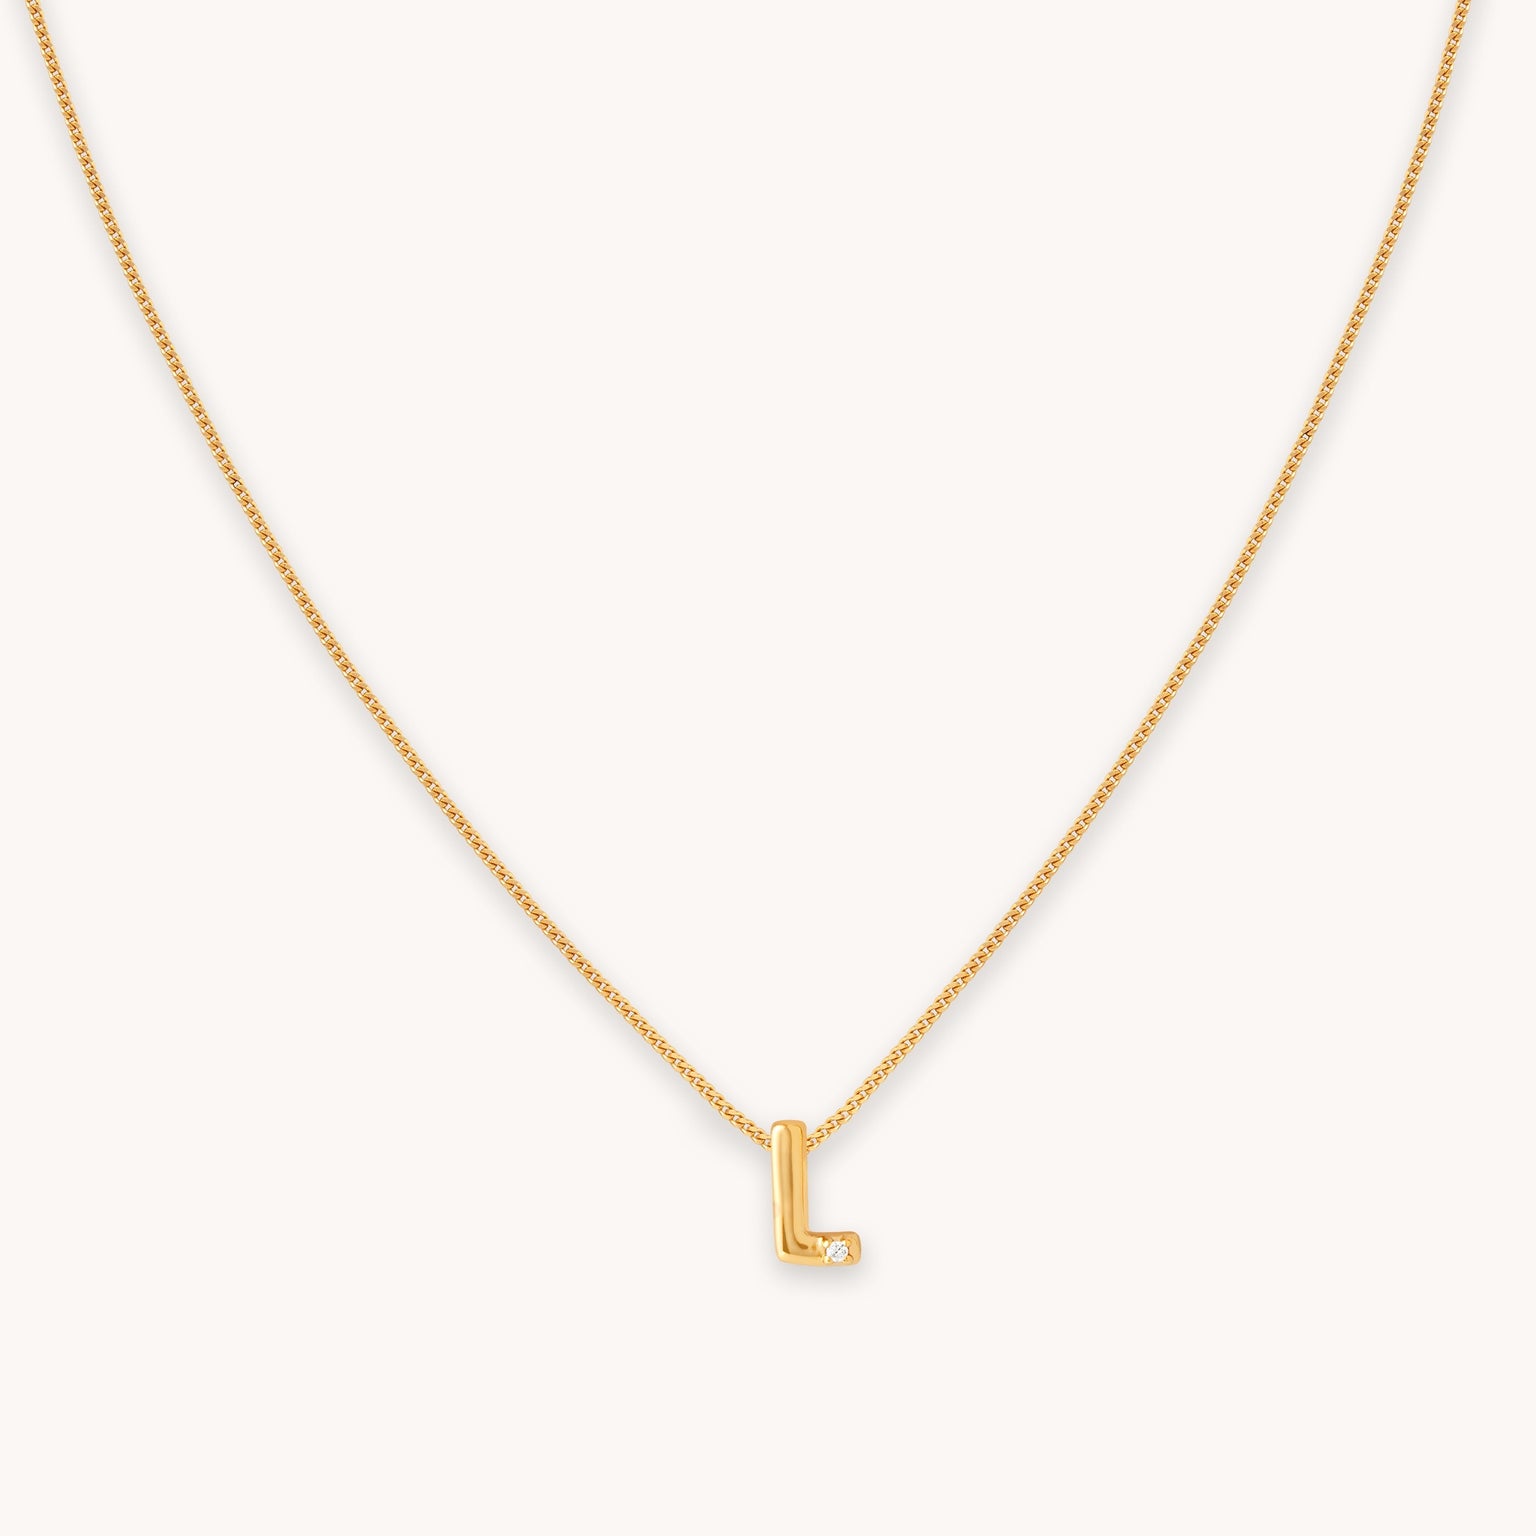 L Initial Pendant Necklace in Gold